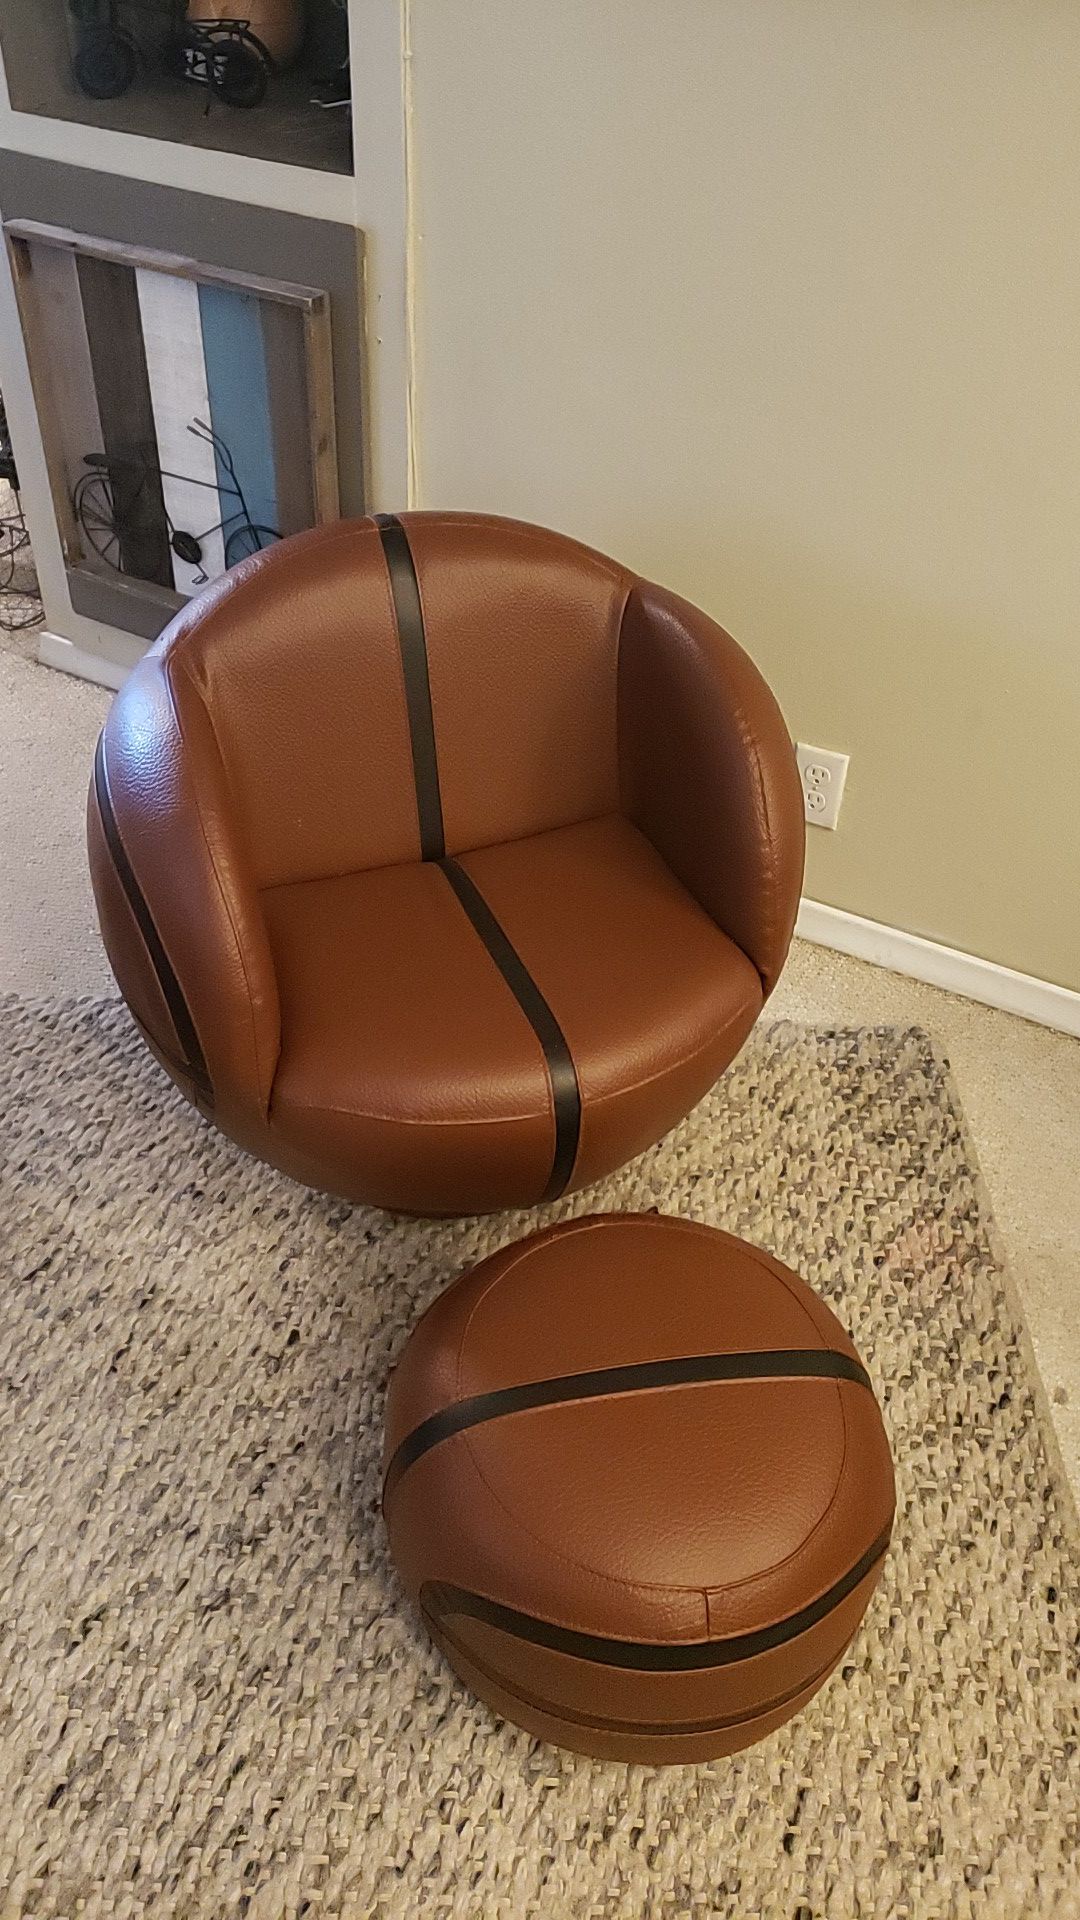 Kids basketball chair and footstool